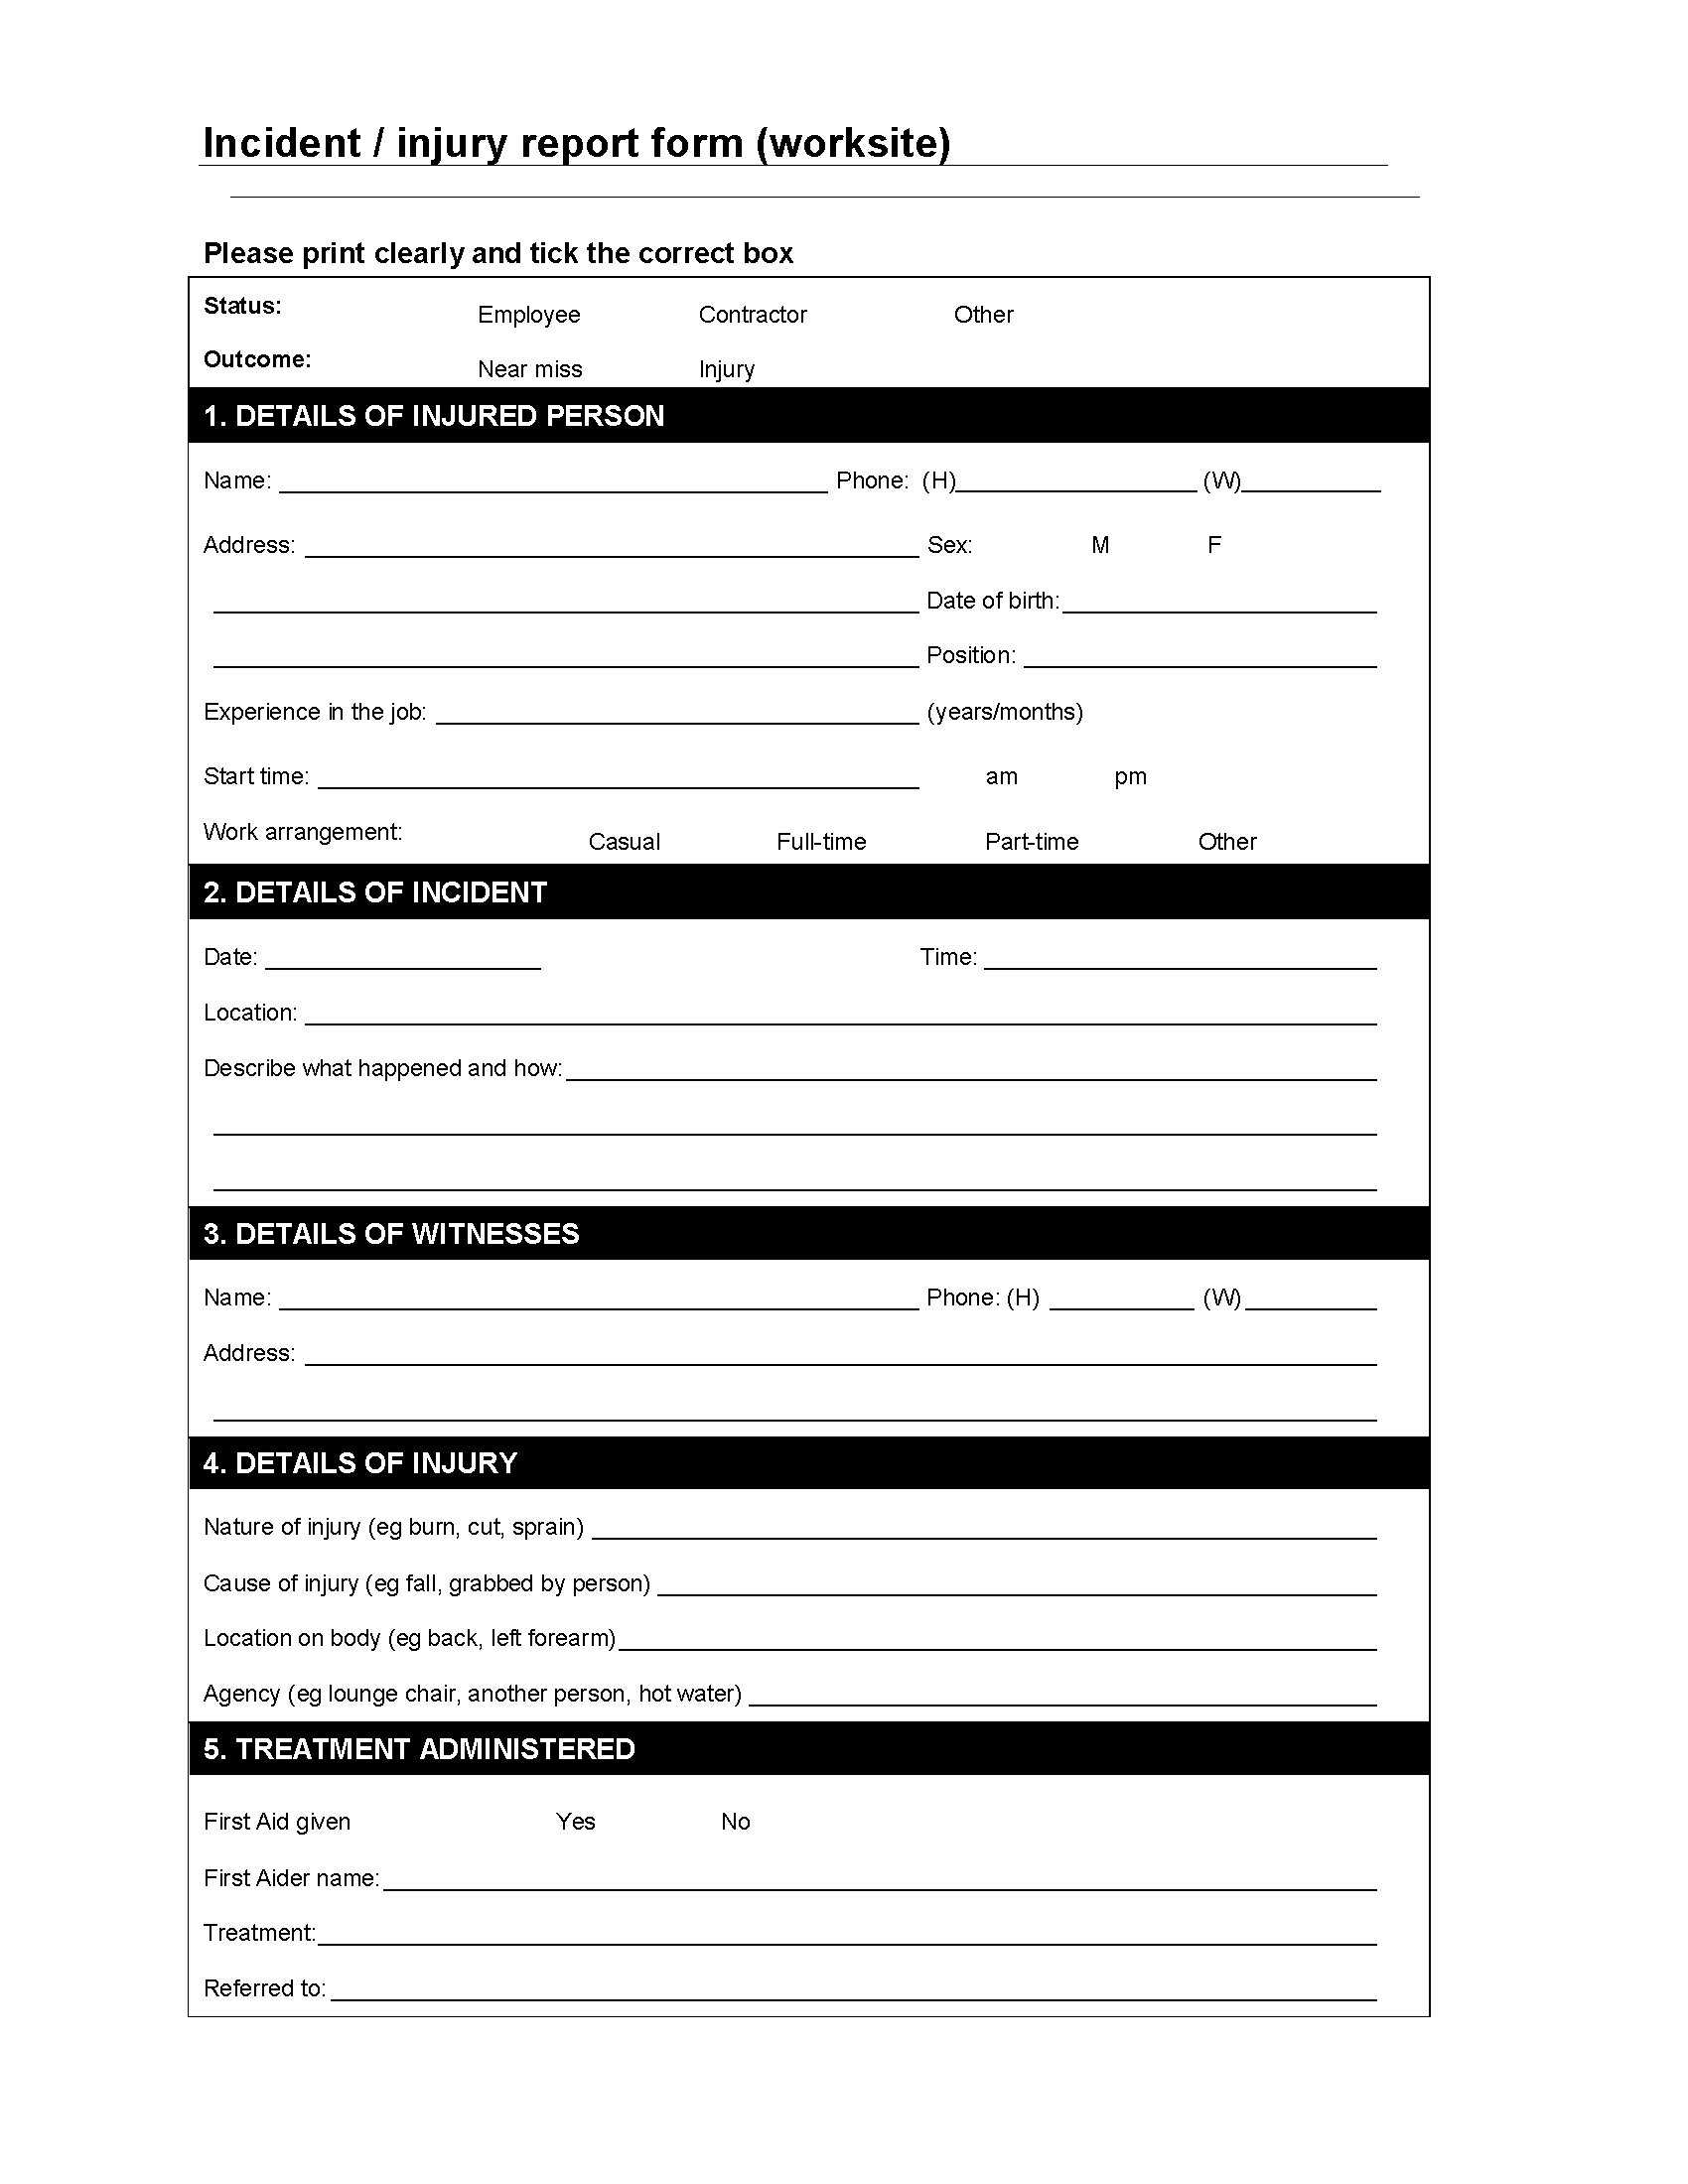 Worksite Incident / Injury Report Form | Legal Forms And For Injury Report Form Template